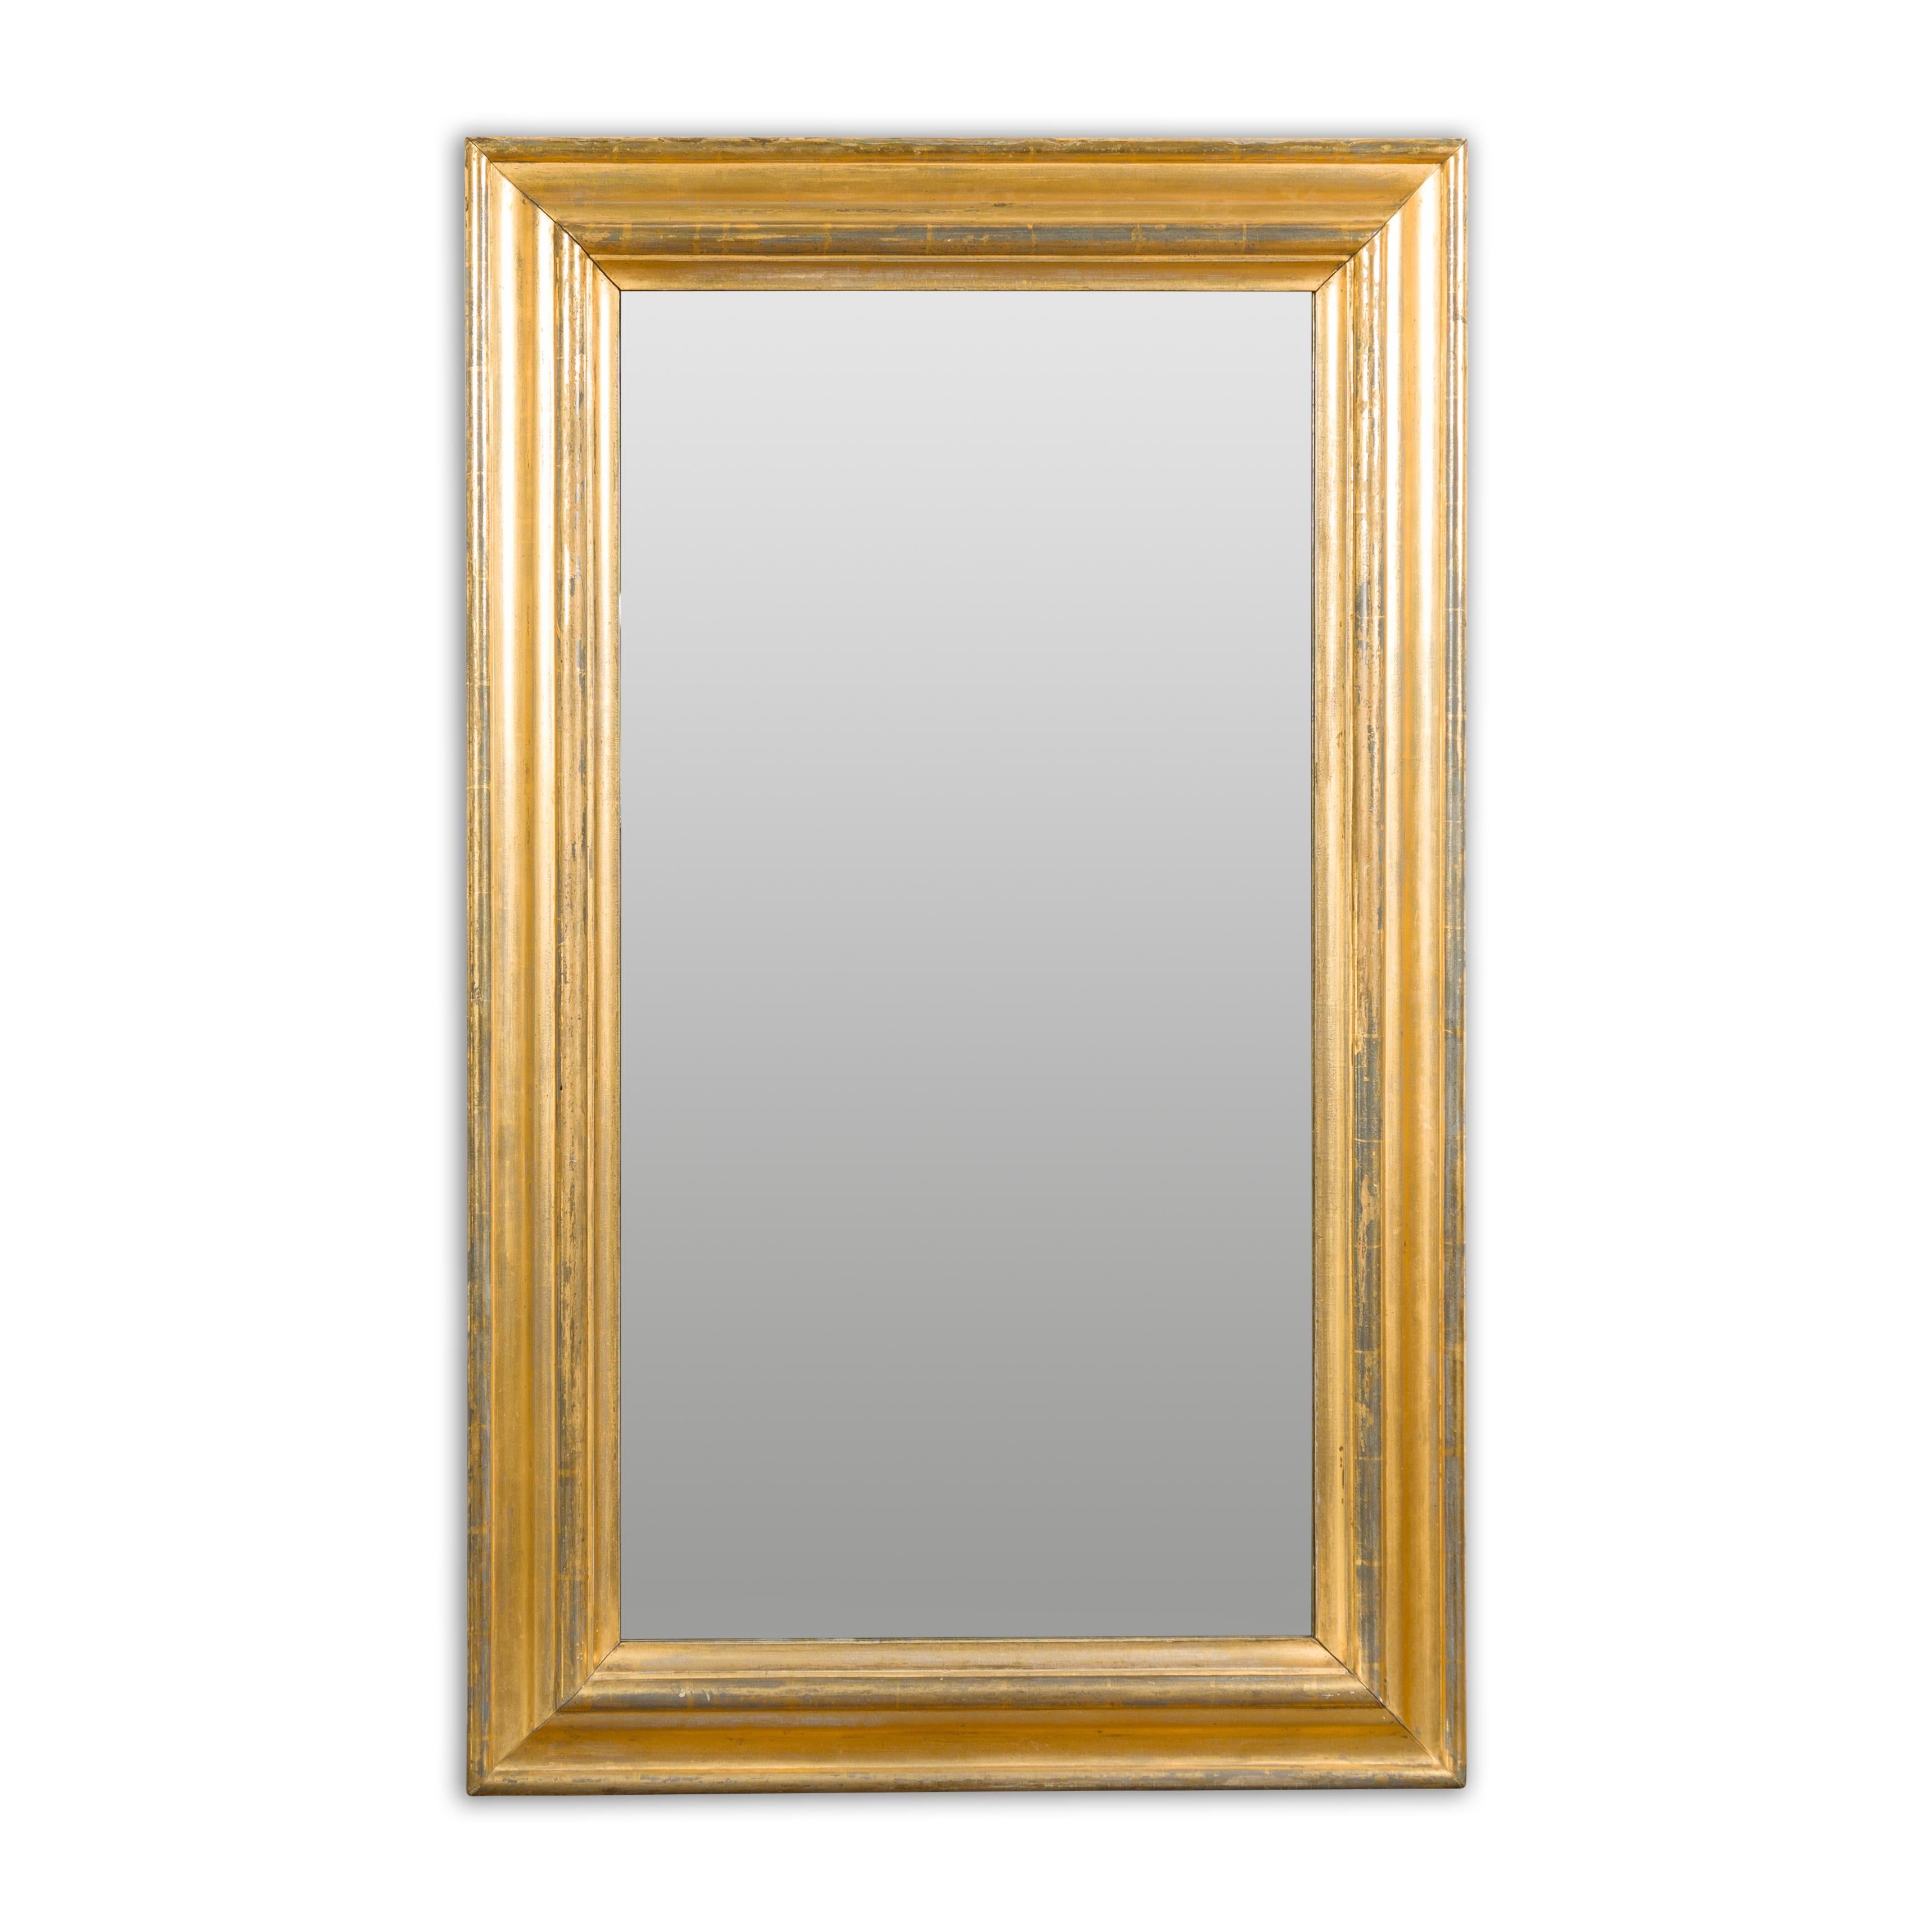 An Italian brass and steel rectangular mirror from the 20th century with molded accents. Reflecting the allure of Italian craftsmanship, this 20th-century brass and steel rectangular mirror infuses any interior with elegance and sophistication. The